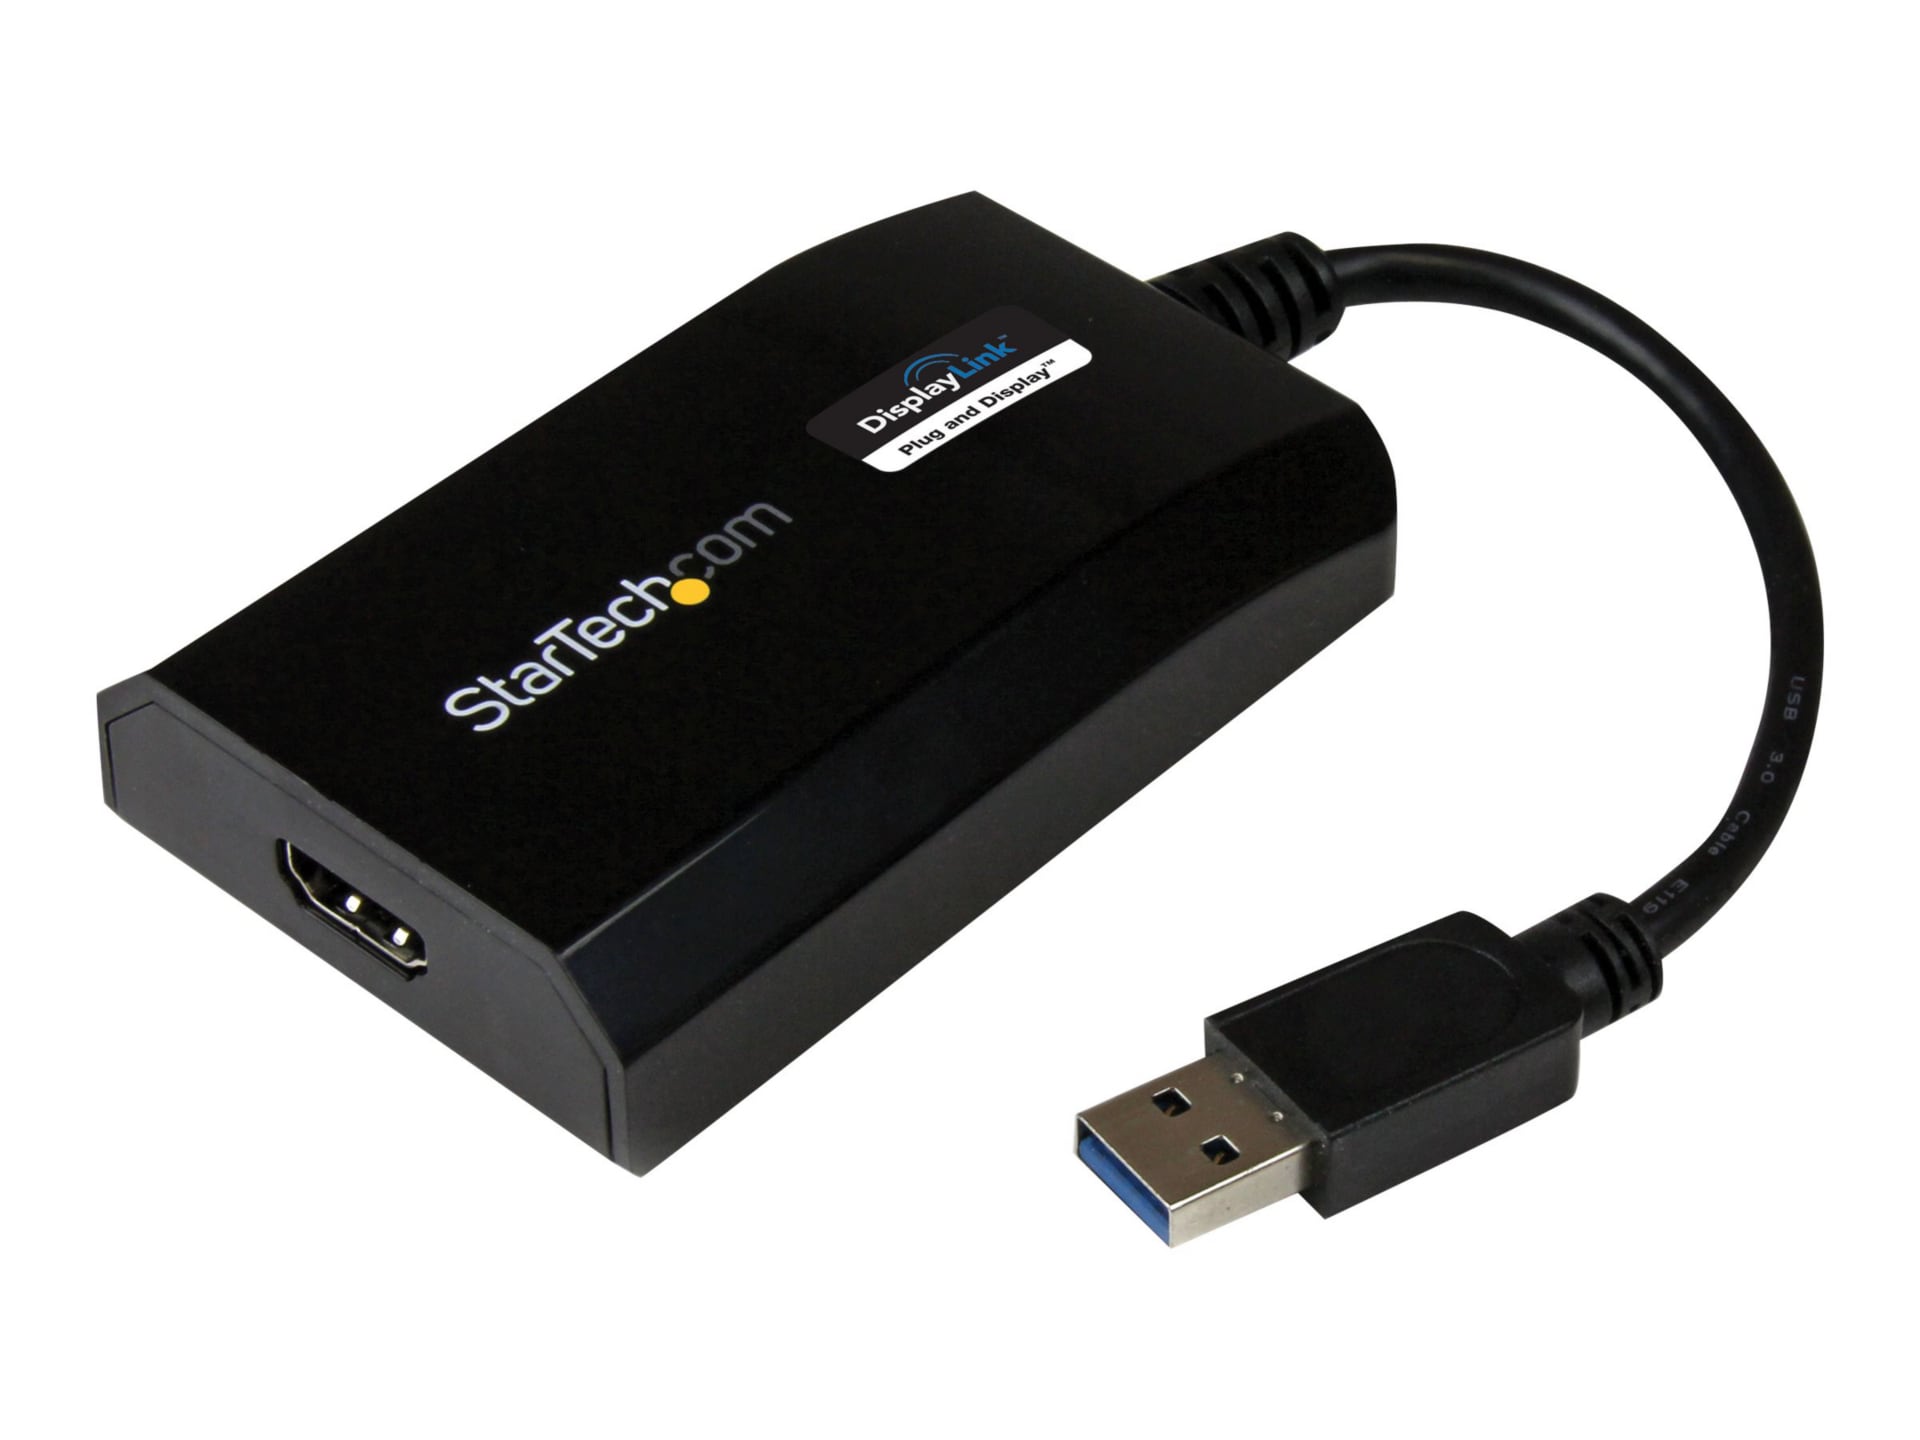 Tutor moord Wasserette StarTech.com USB 3.0 to HDMI Adapter - DisplayLink Certified - External  Graphics Card for Mac/PC - USB32HDPRO - Monitor Cables & Adapters - CDW.com